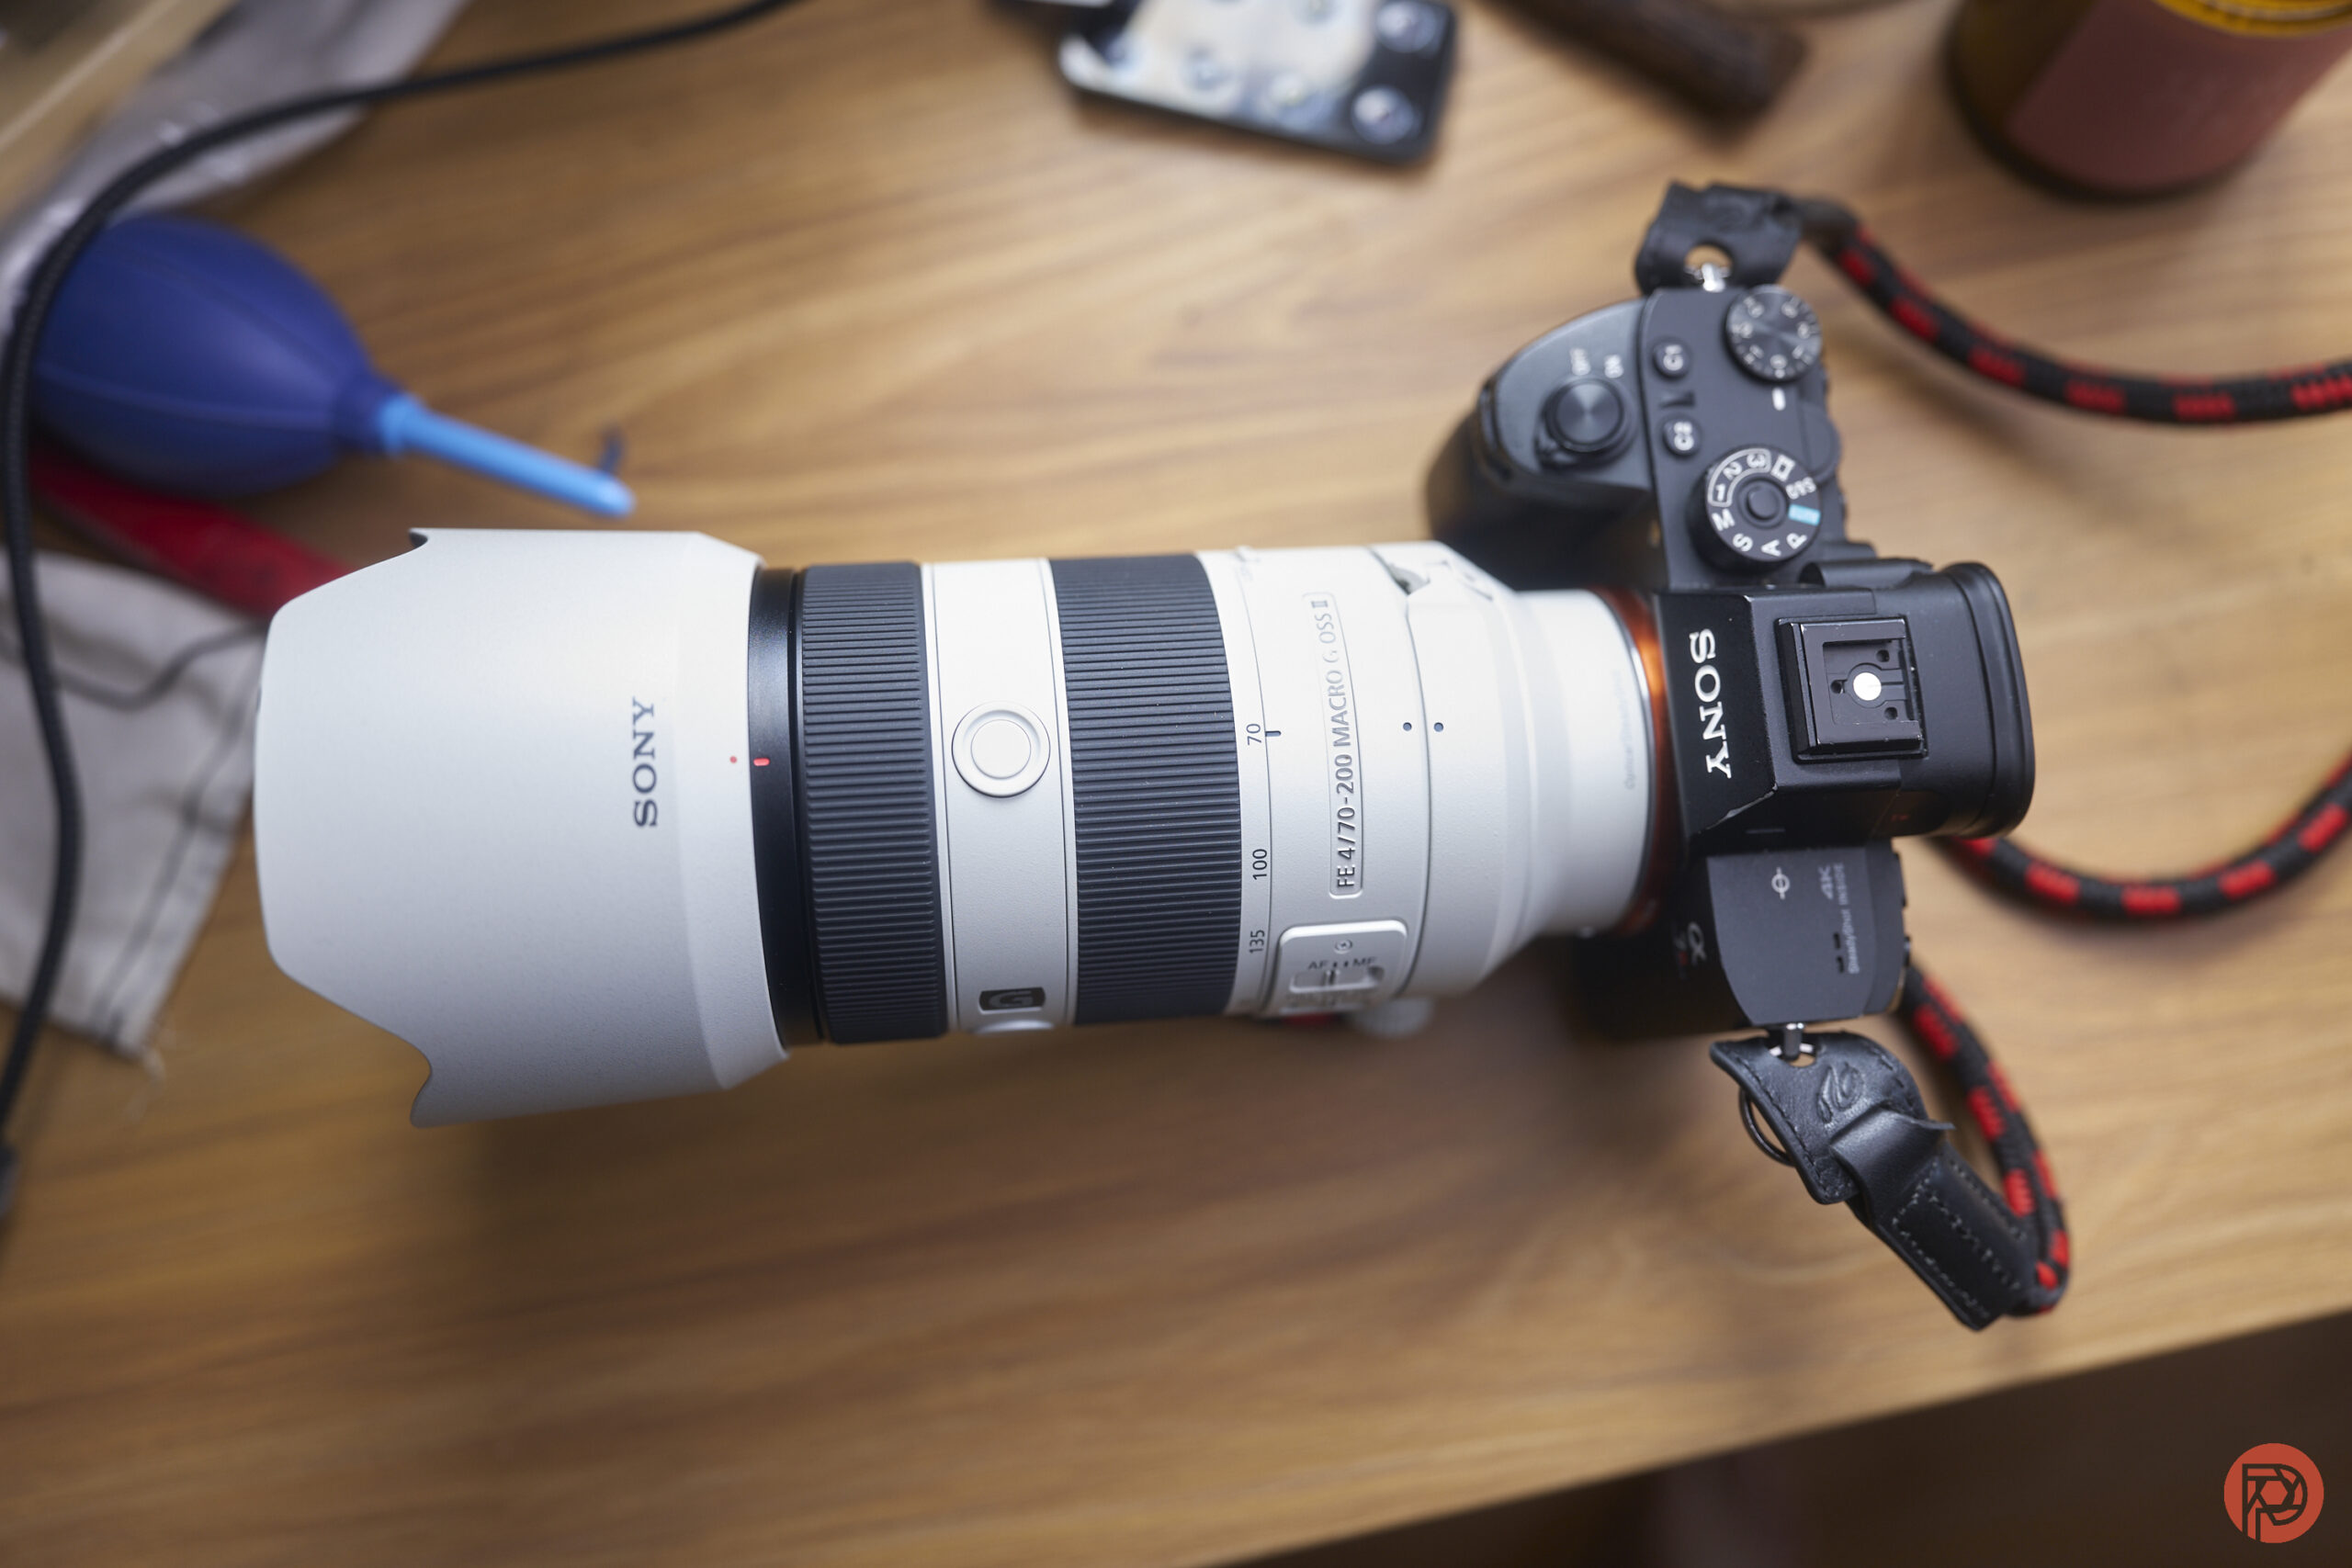 Chris Gampat The Phoblographer Sony 70-200mm f4 G OSS II review product images 21-250s400